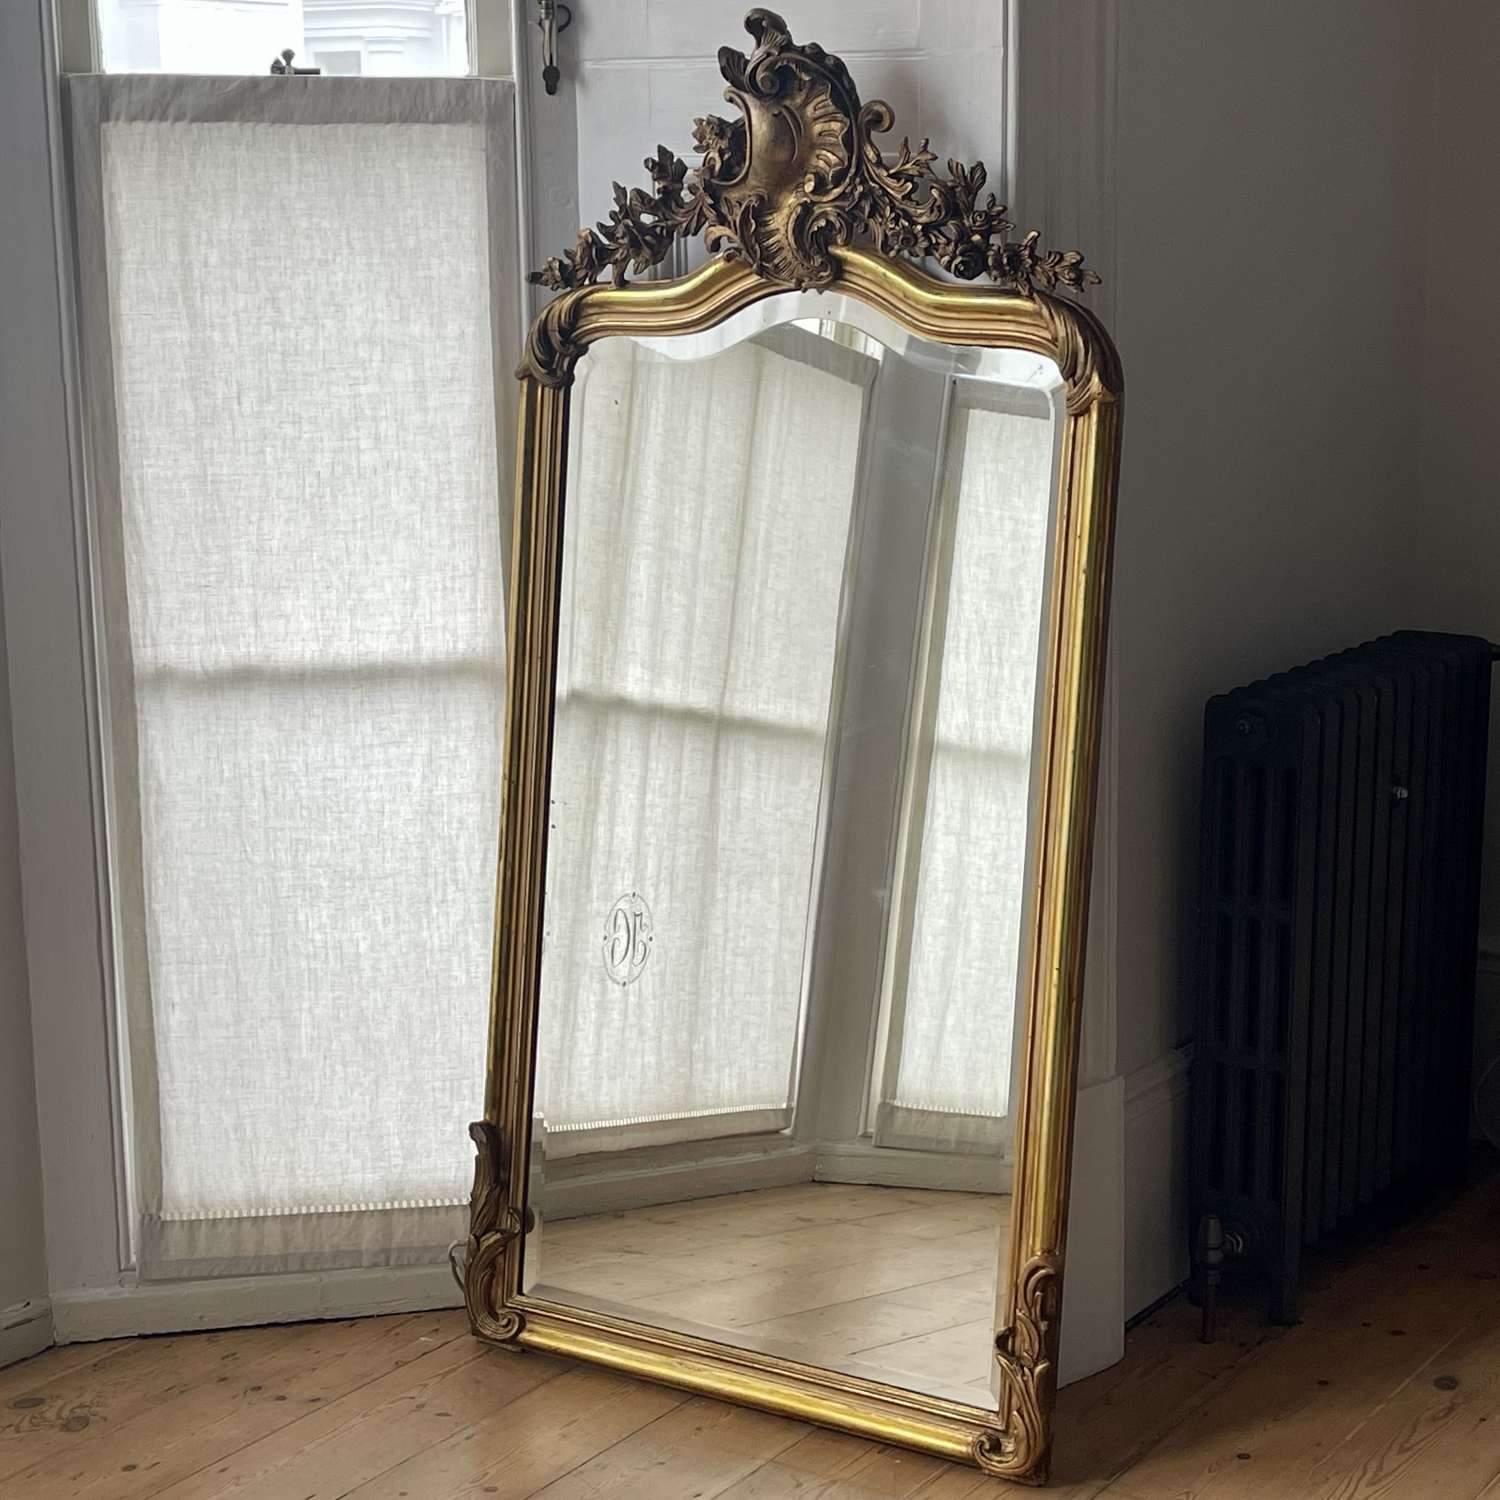 Antique French gilt Louis XV mirror - bevelled glass